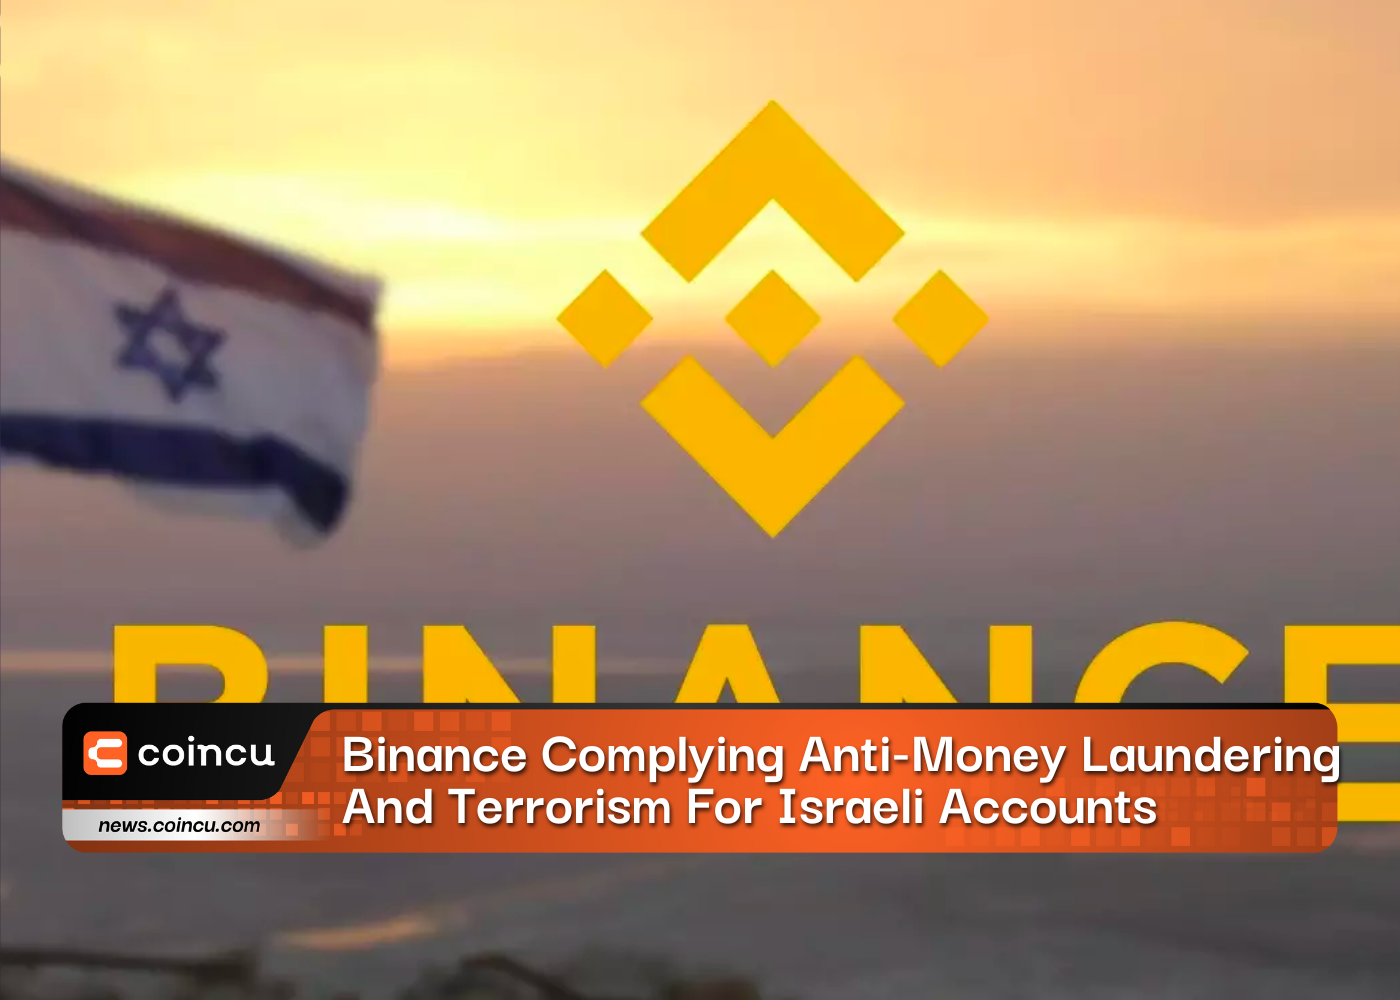 Binance Complying With Anti-Money Laundering And Terrorism For Israeli Accounts